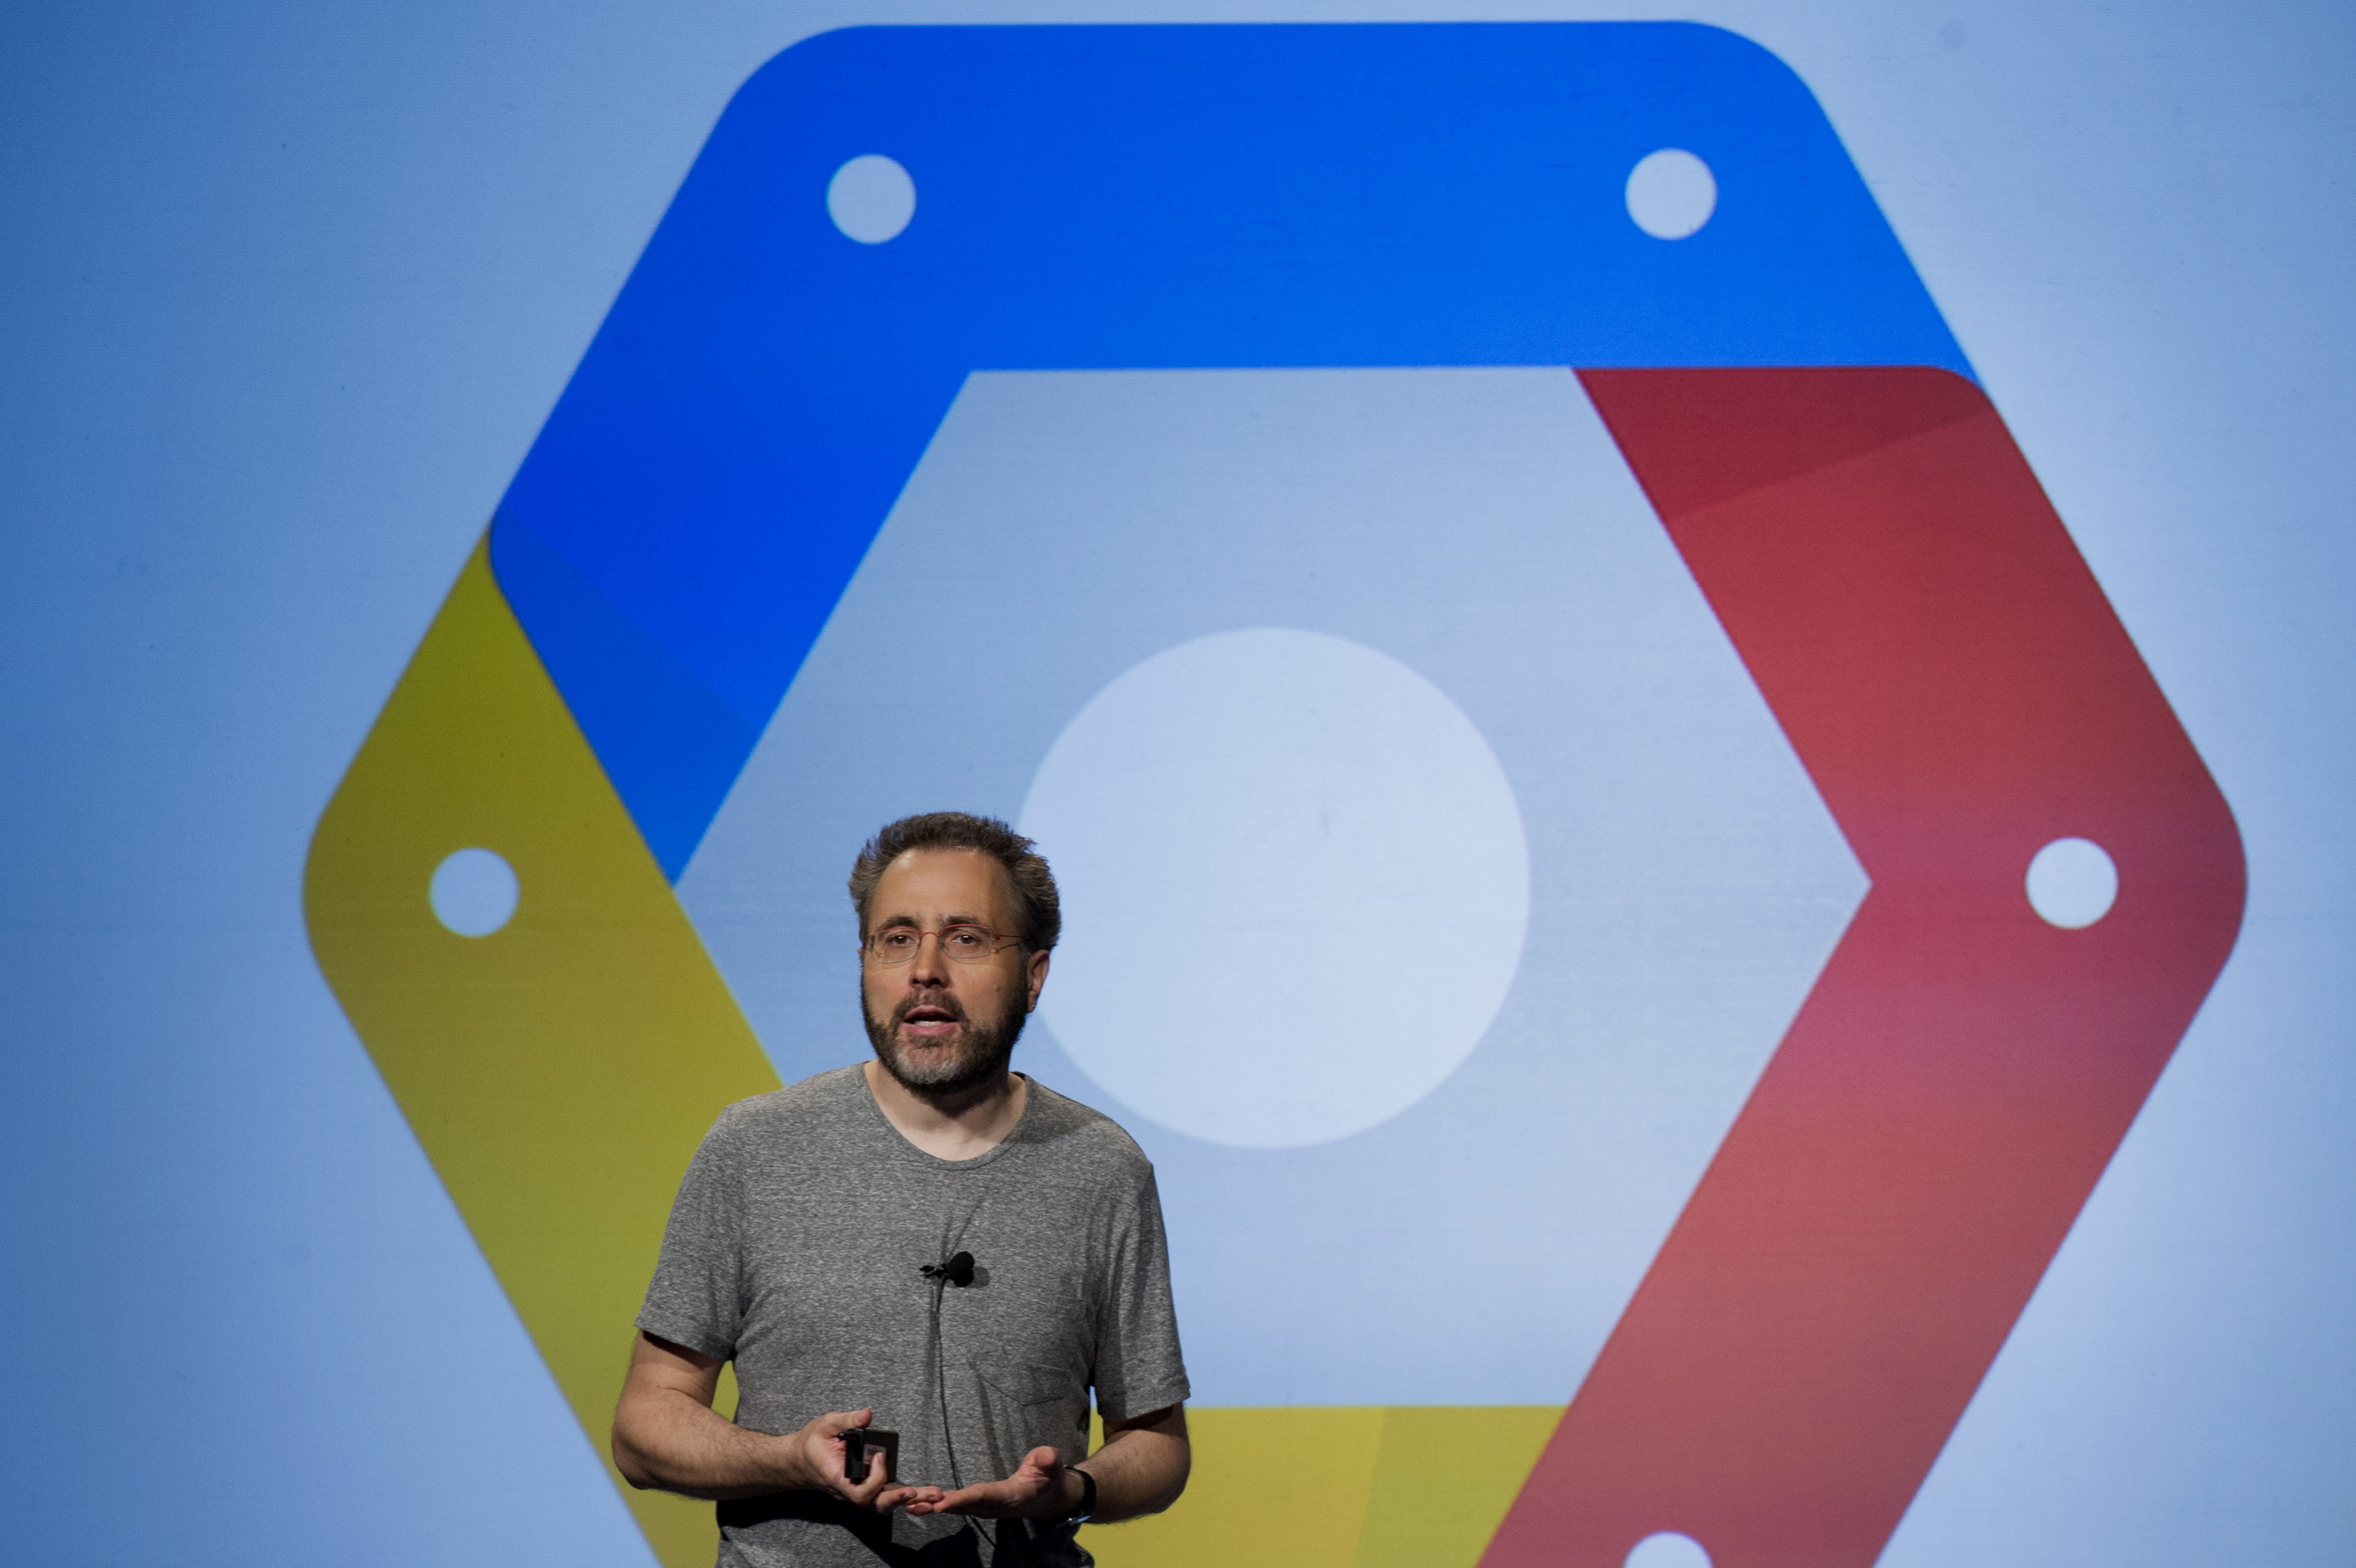 Google Cloud Platform cuts the price of GPUs by up to 36 percent